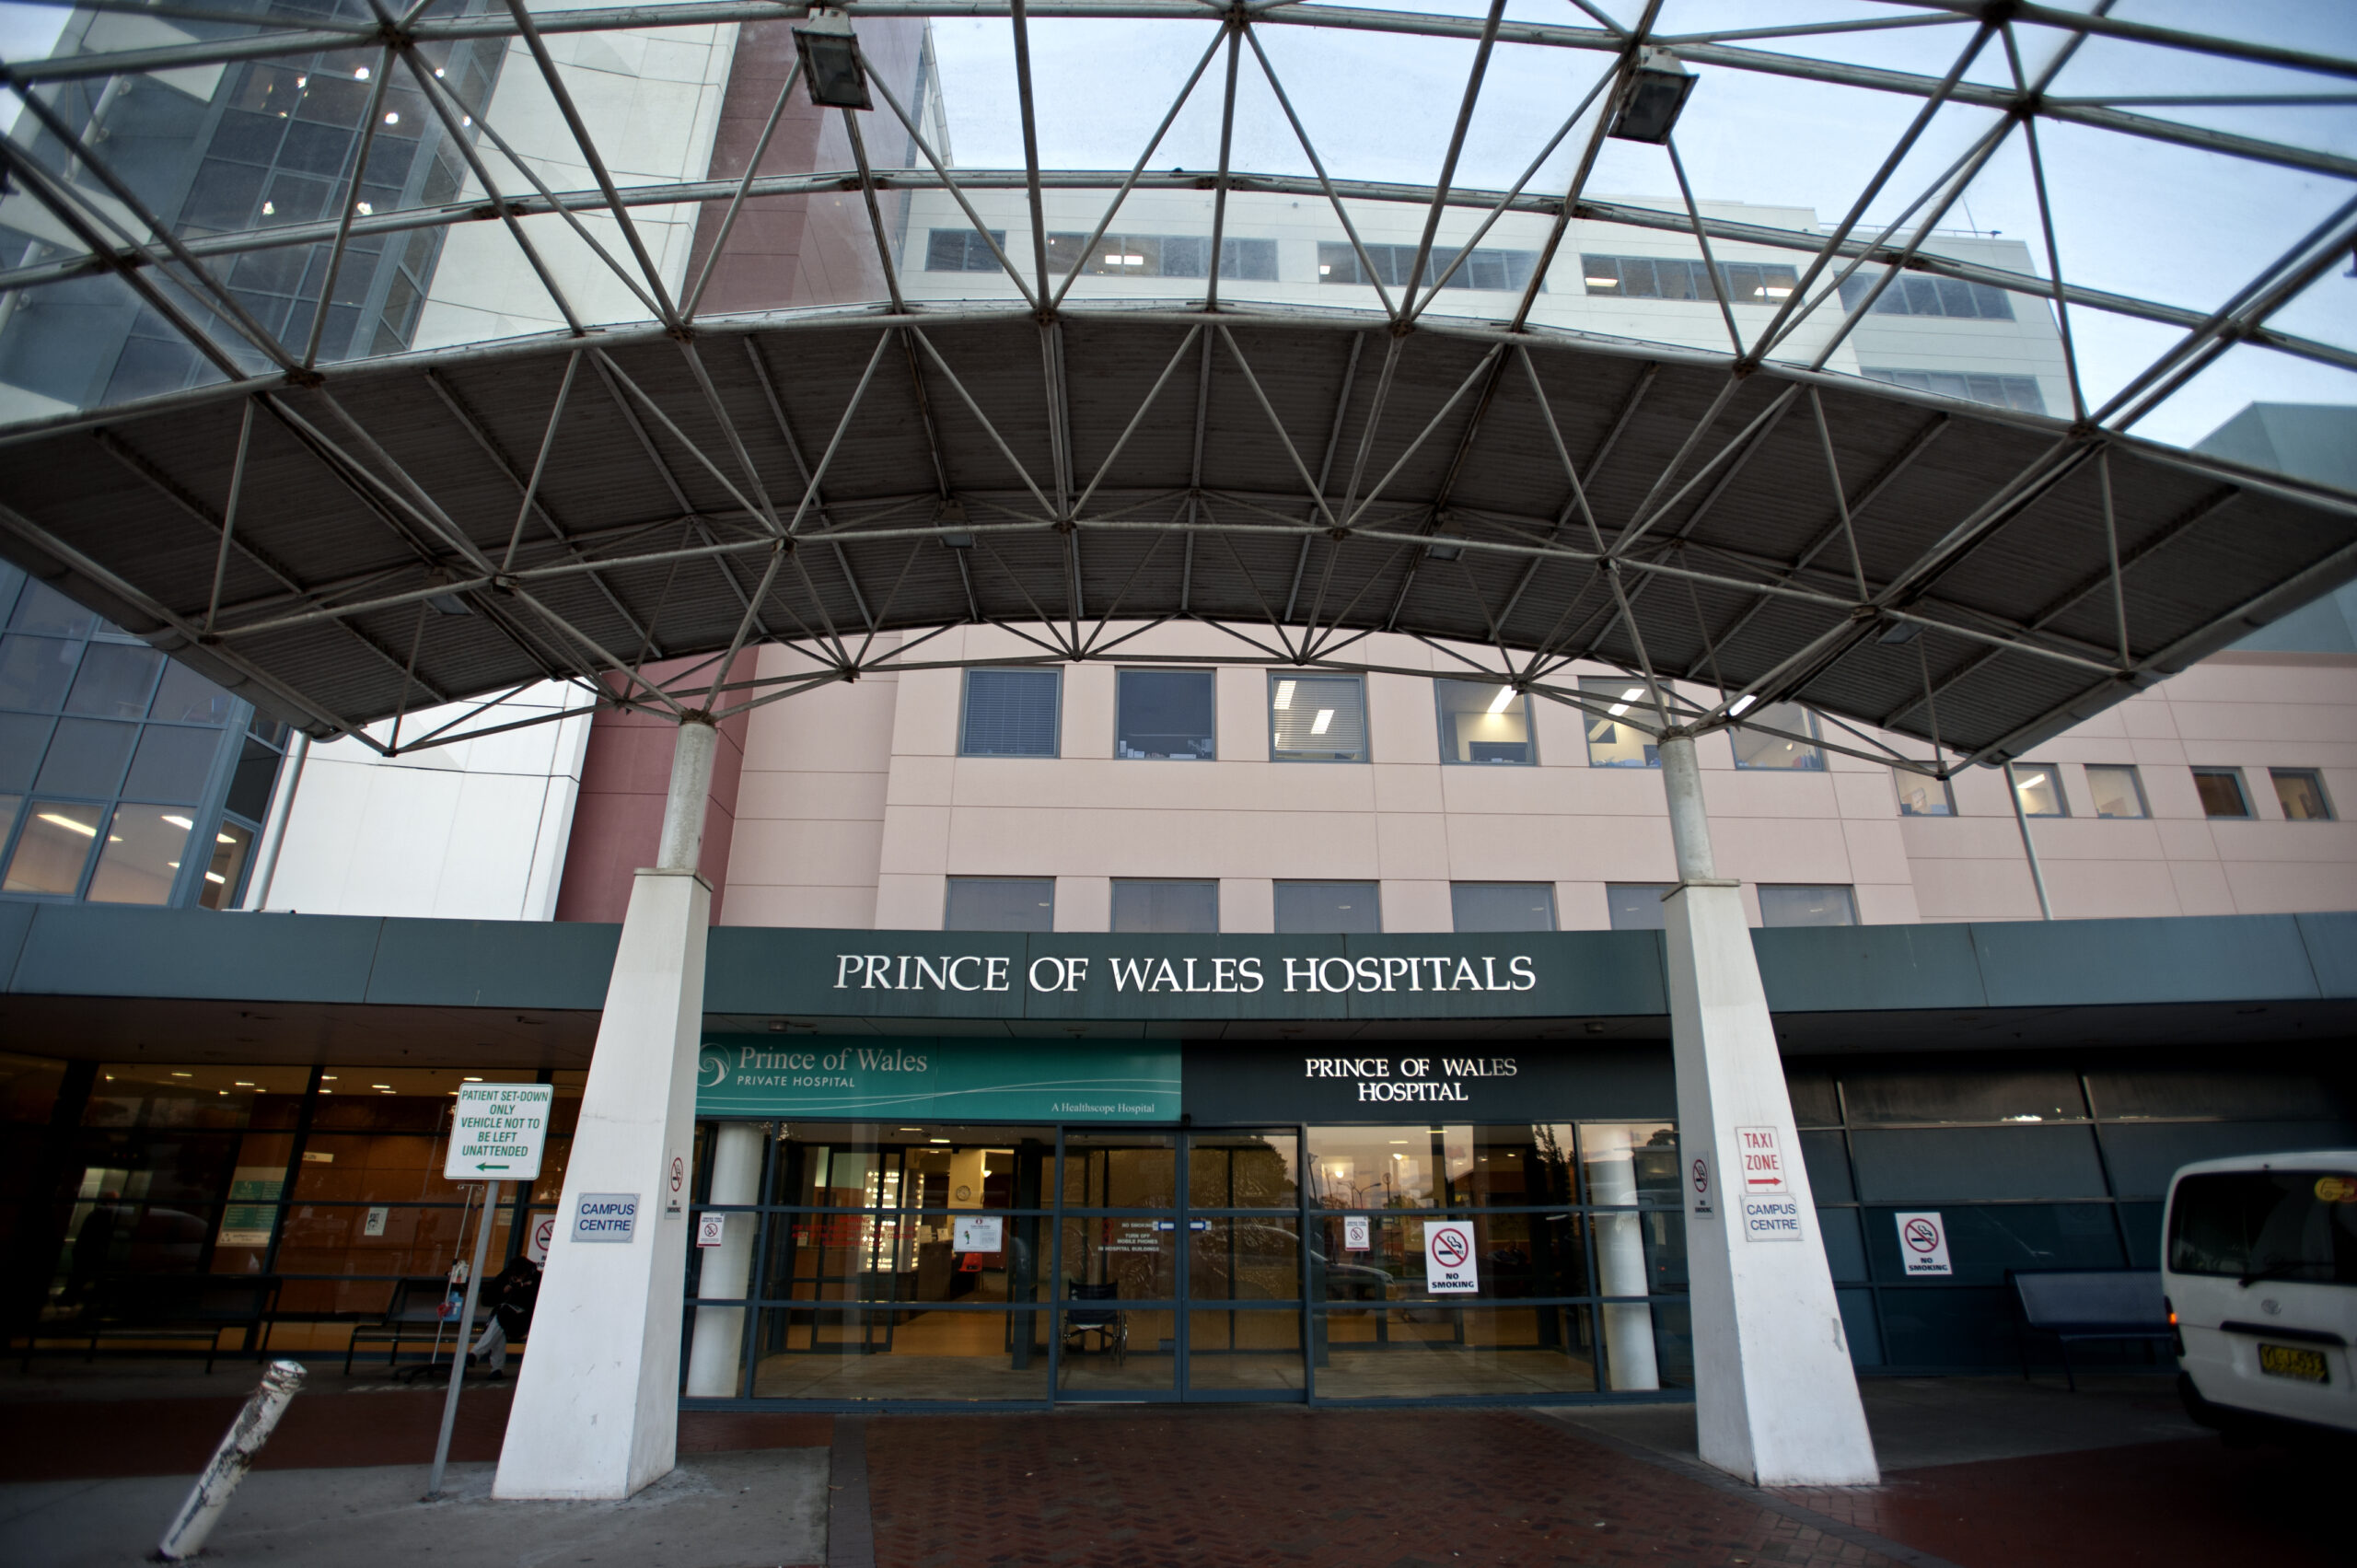 Major roof leaks found in Prince of Wales Hospital development